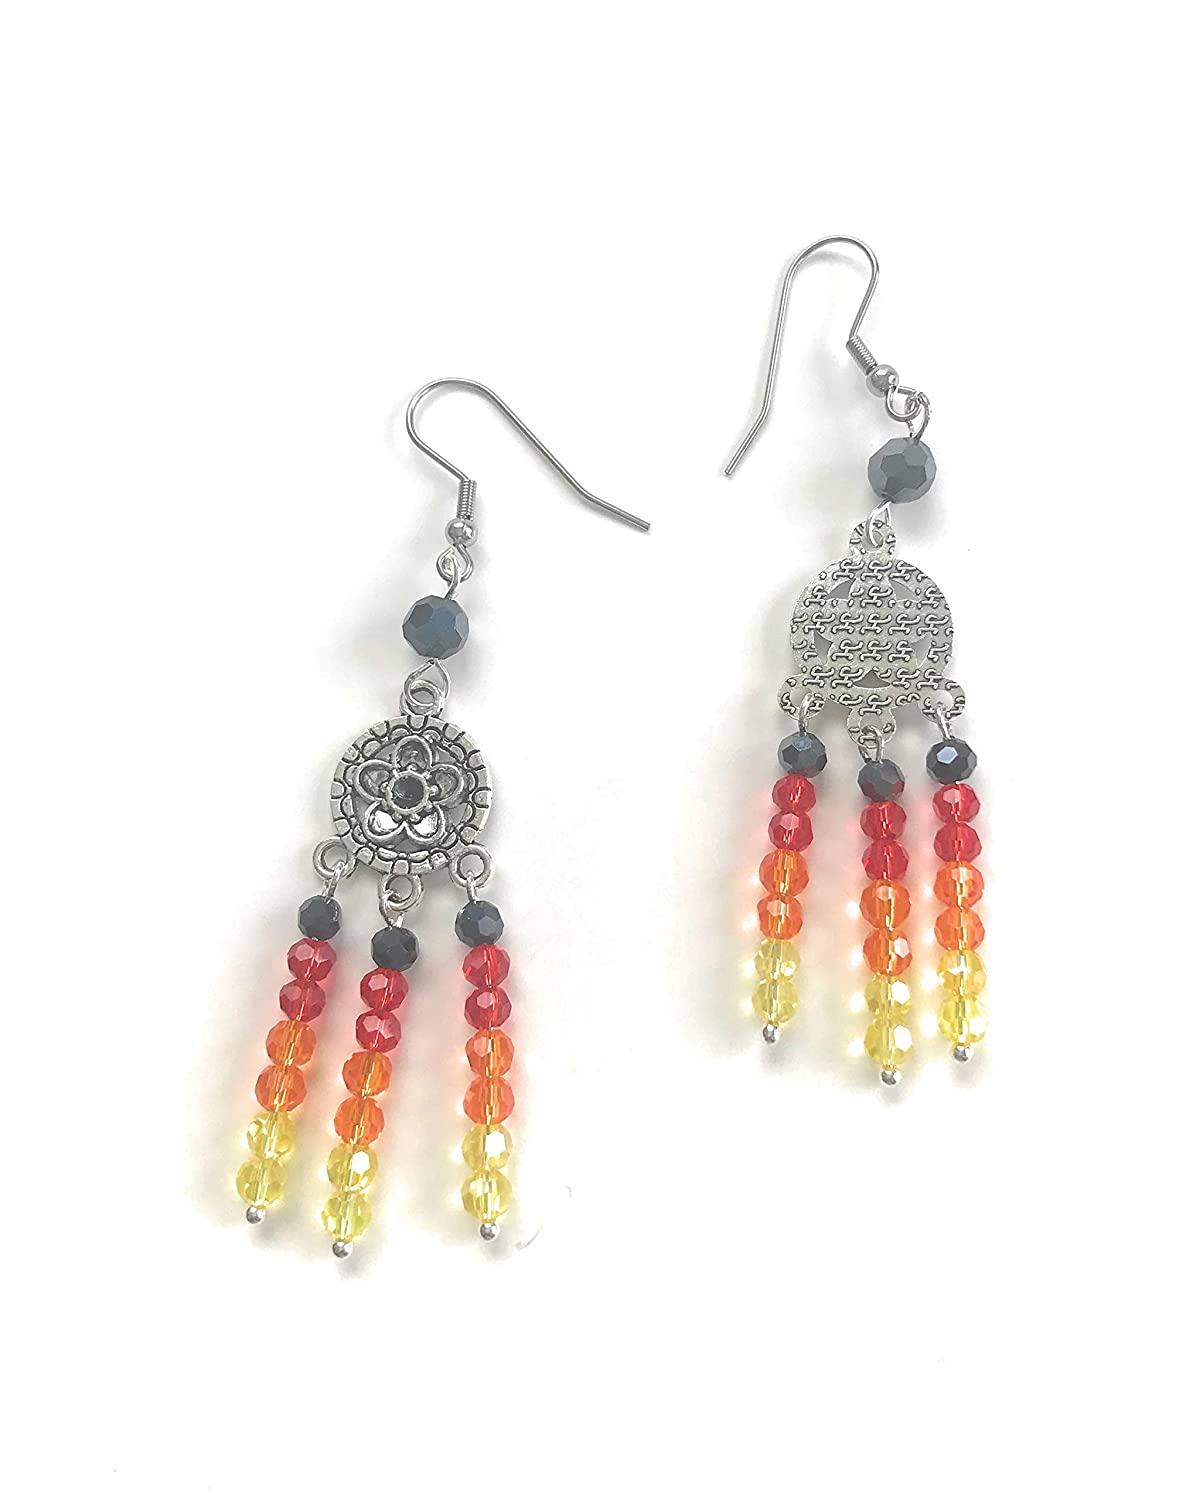 Fire Color Crystal Beaded Chandelier Earrings Front and Back View from Scott D Jewelry Designs